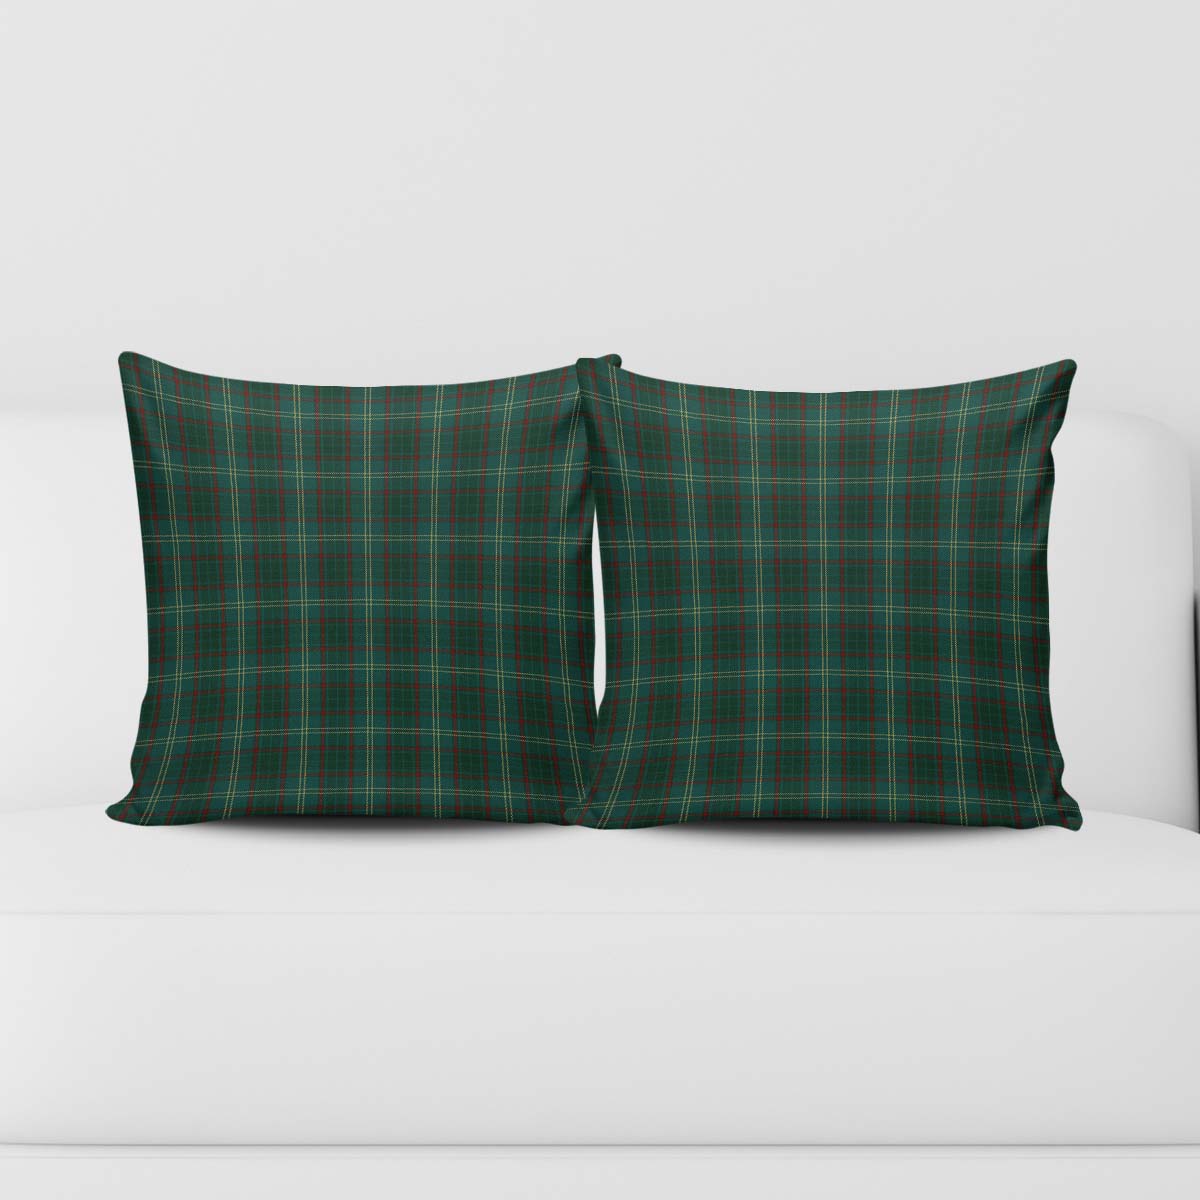 Armagh County Ireland Tartan Pillow Cover Square Pillow Cover - Tartanvibesclothing